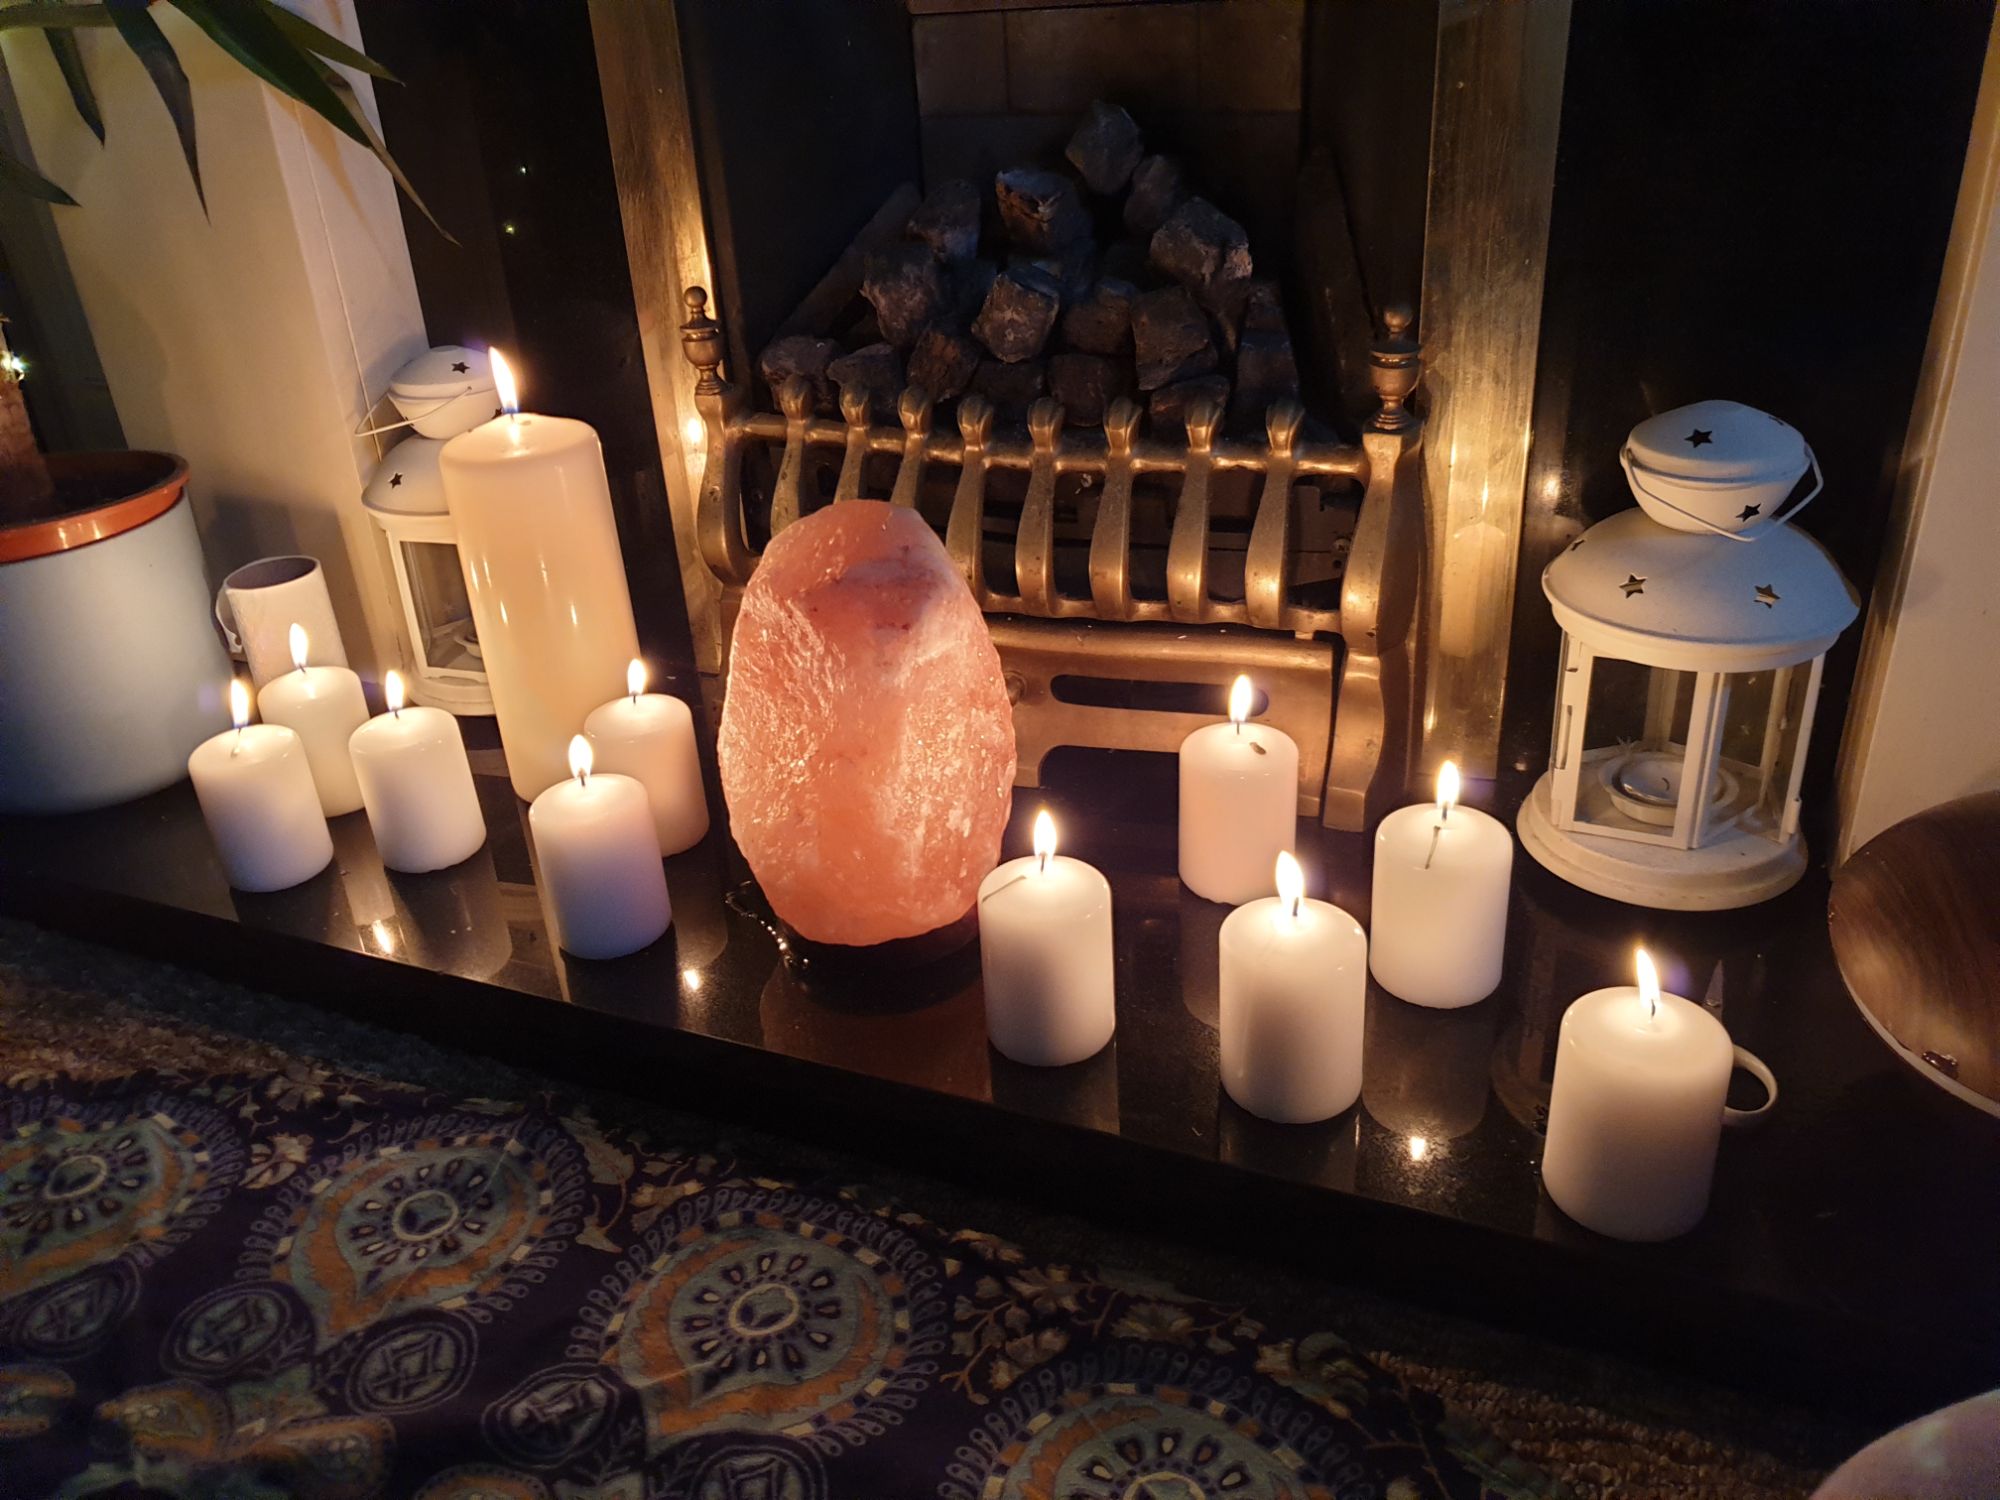 11 candles displayed on a hearth - one large one for the mother and 10 small ones for her guests.